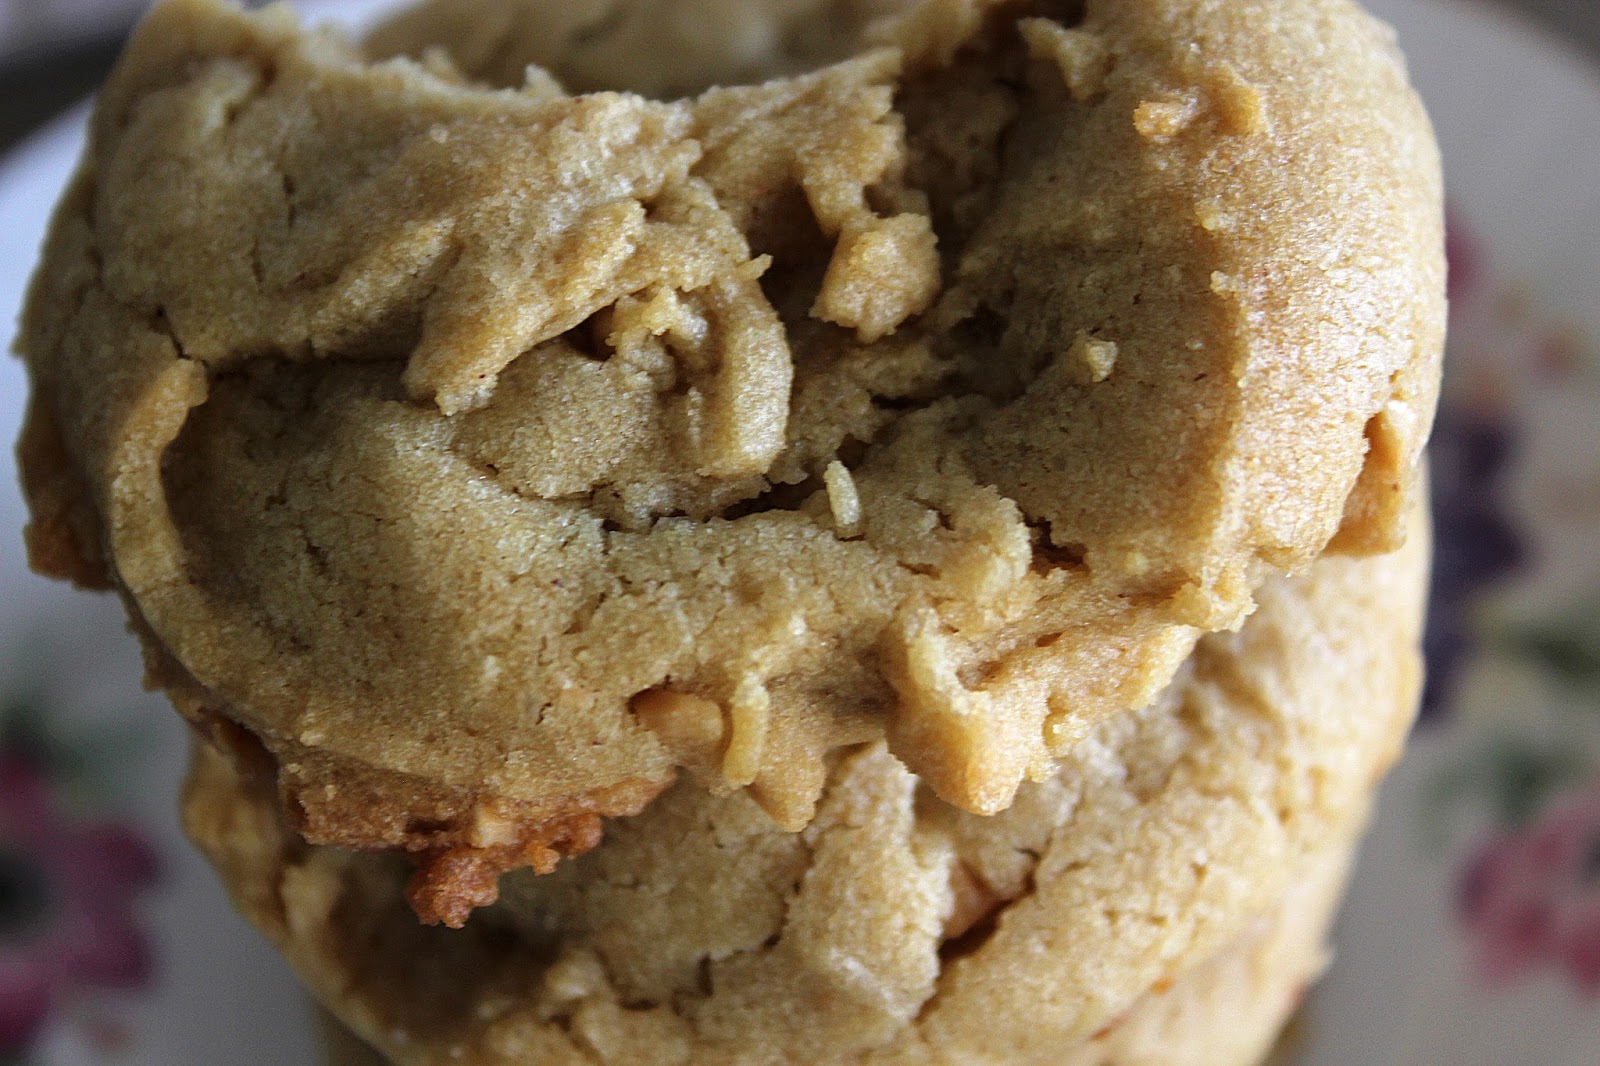 Natural Peanut Butter Cookies by freshfromthe.com